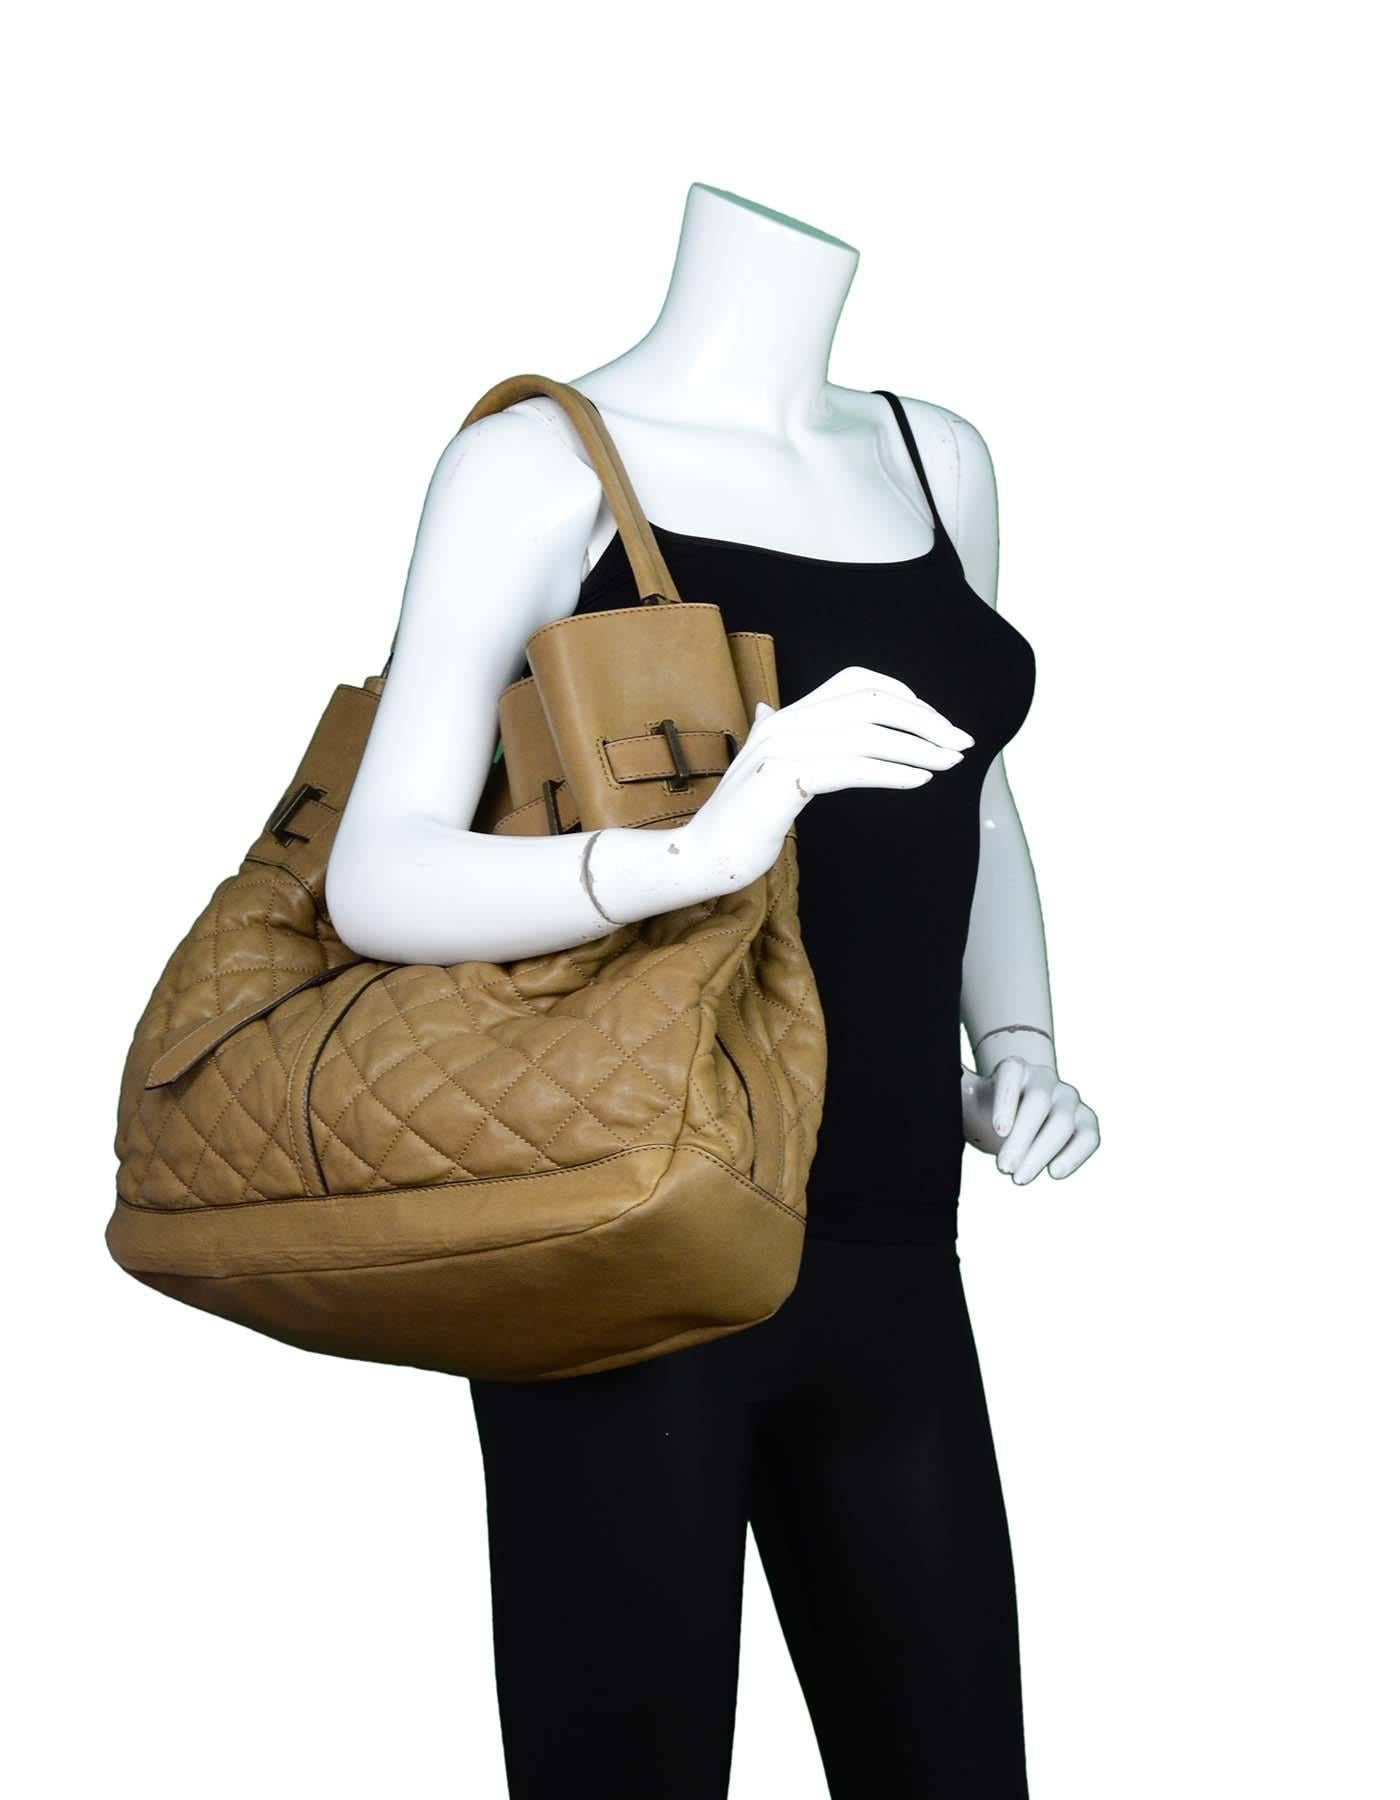 Burberry Brown Quilted Leather Tote
Features belt detail

Color: Brown
Hardware: Brass
Materials: Leather, metal
Lining: Nova check textile
Closure/Opening: Open top with center double snap
Exterior Pockets: None
Interior Pockets: Center